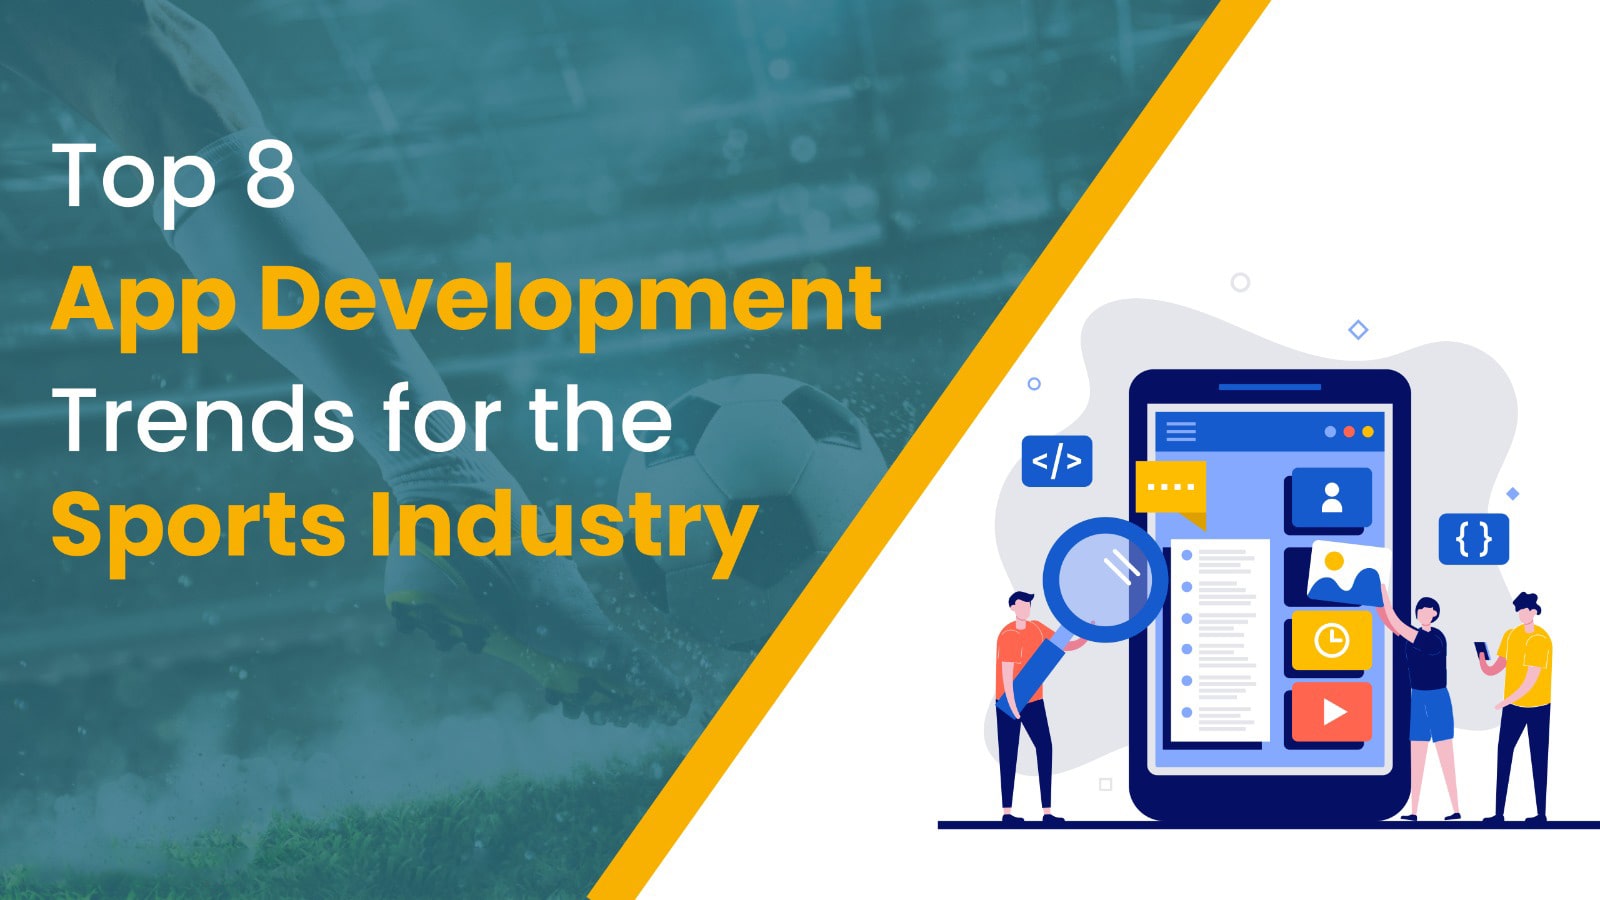 Top 8 App Development Trends for the Sports Industry